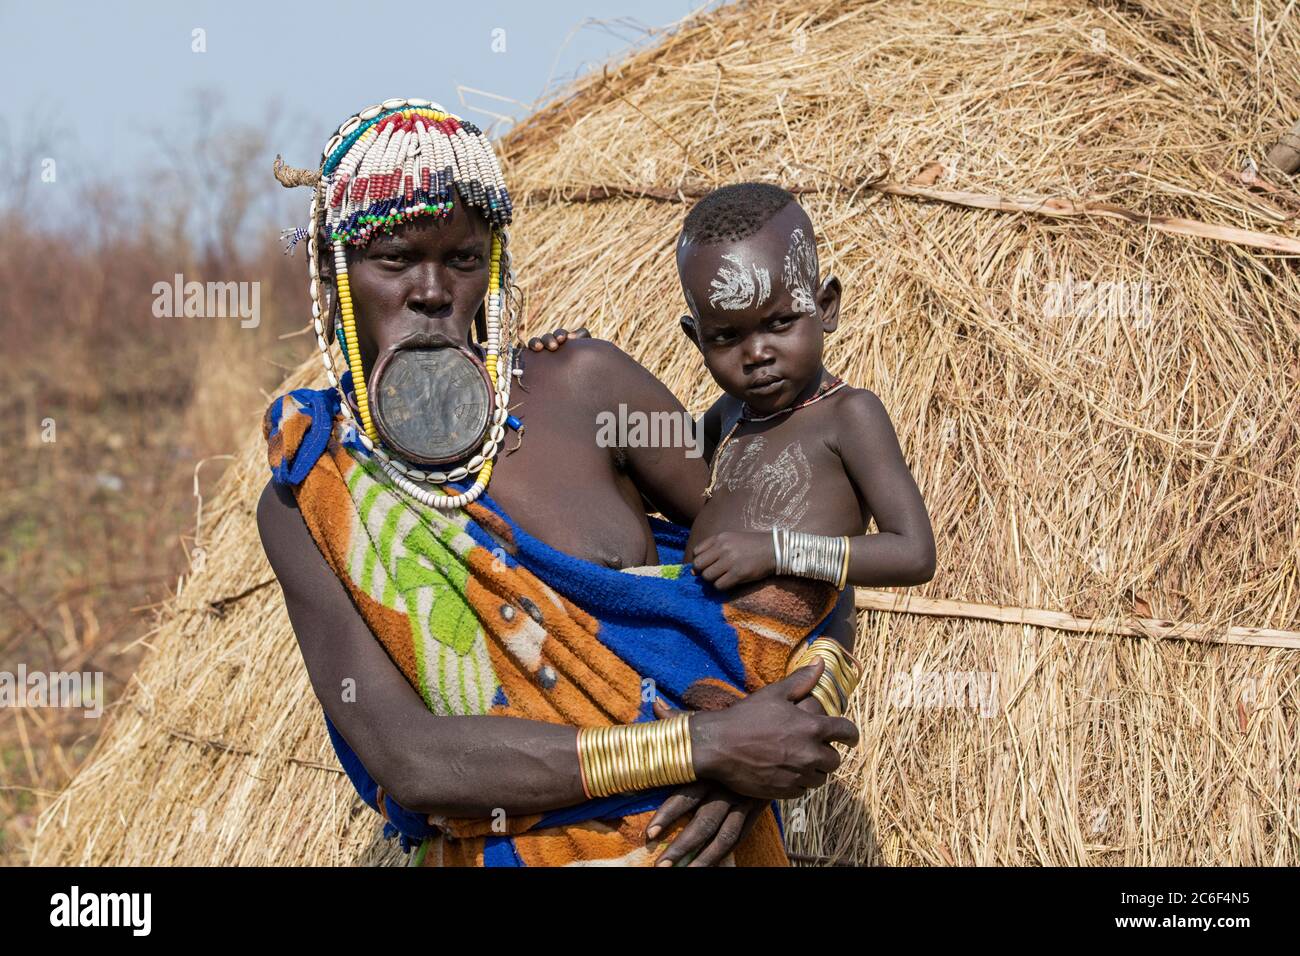 Black woman with child of the Mursi tribe wearing lip plate and beads in the Mago National Park near Jinka, Debub Omo Zone, Southern Ethiopia, Africa Stock Photo